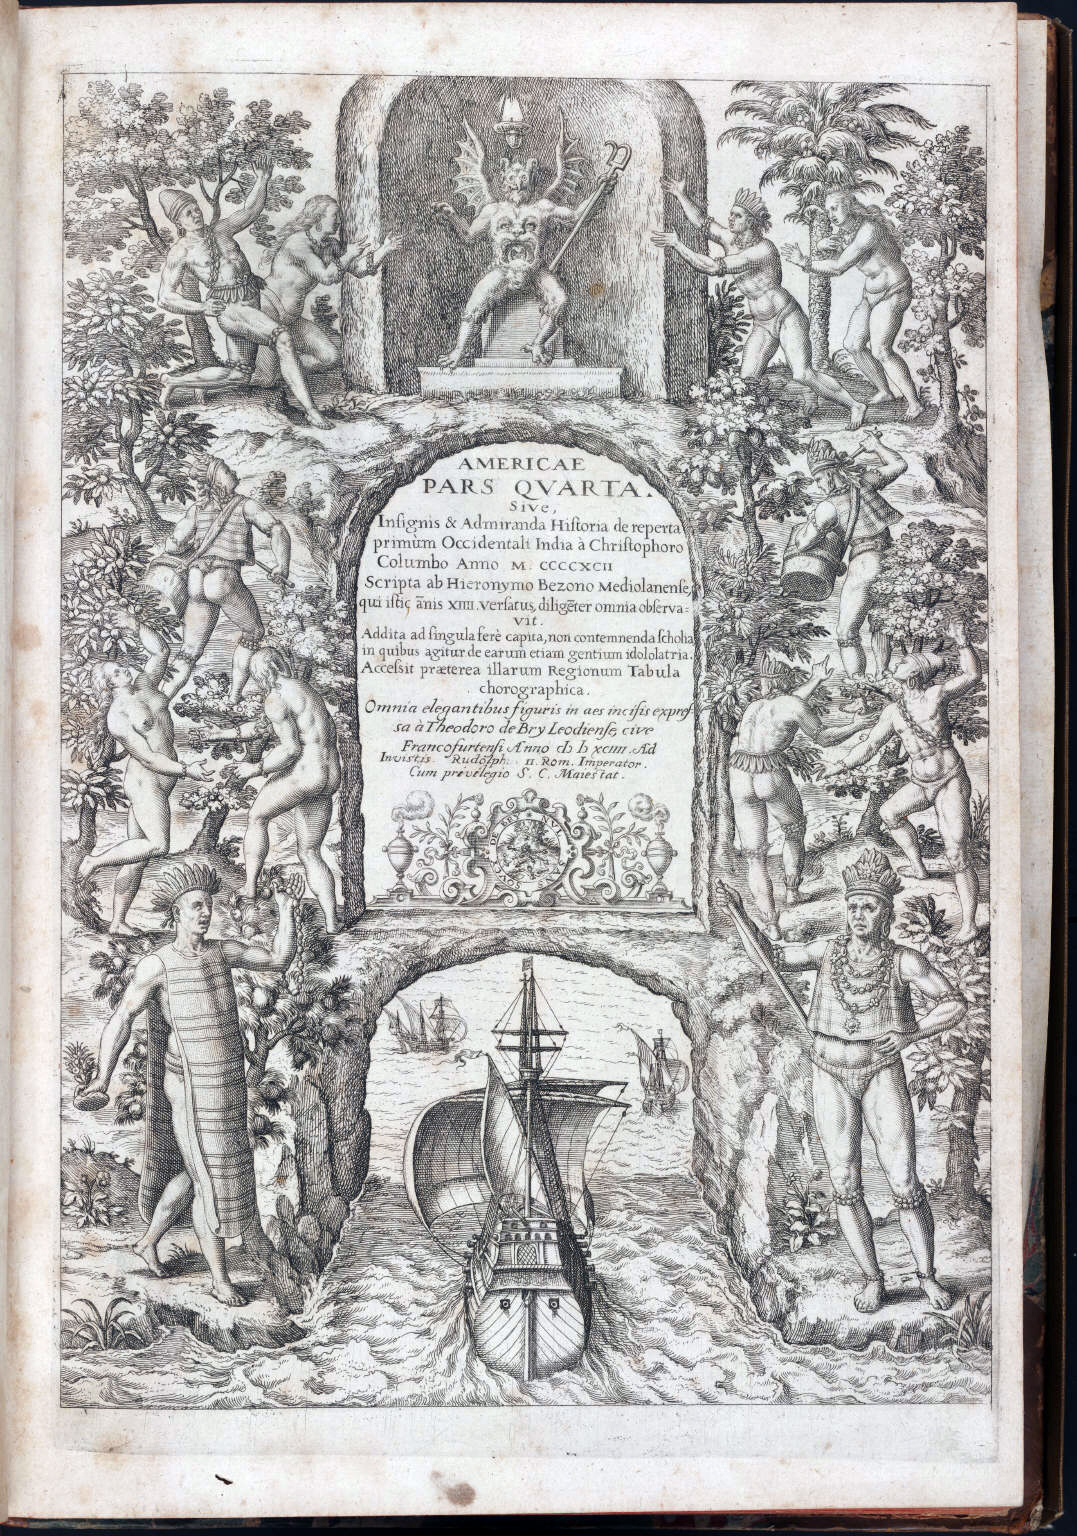 Theodor de Bry, Title page for "Historia del Mondo Nuovo," title page (text by Girolamo Benzoni), engraving. Courtesy of the Yale Collection of Western Americana, Beinecke Rare Book and Manuscript Library, Yale University, New Haven, Connecticut.